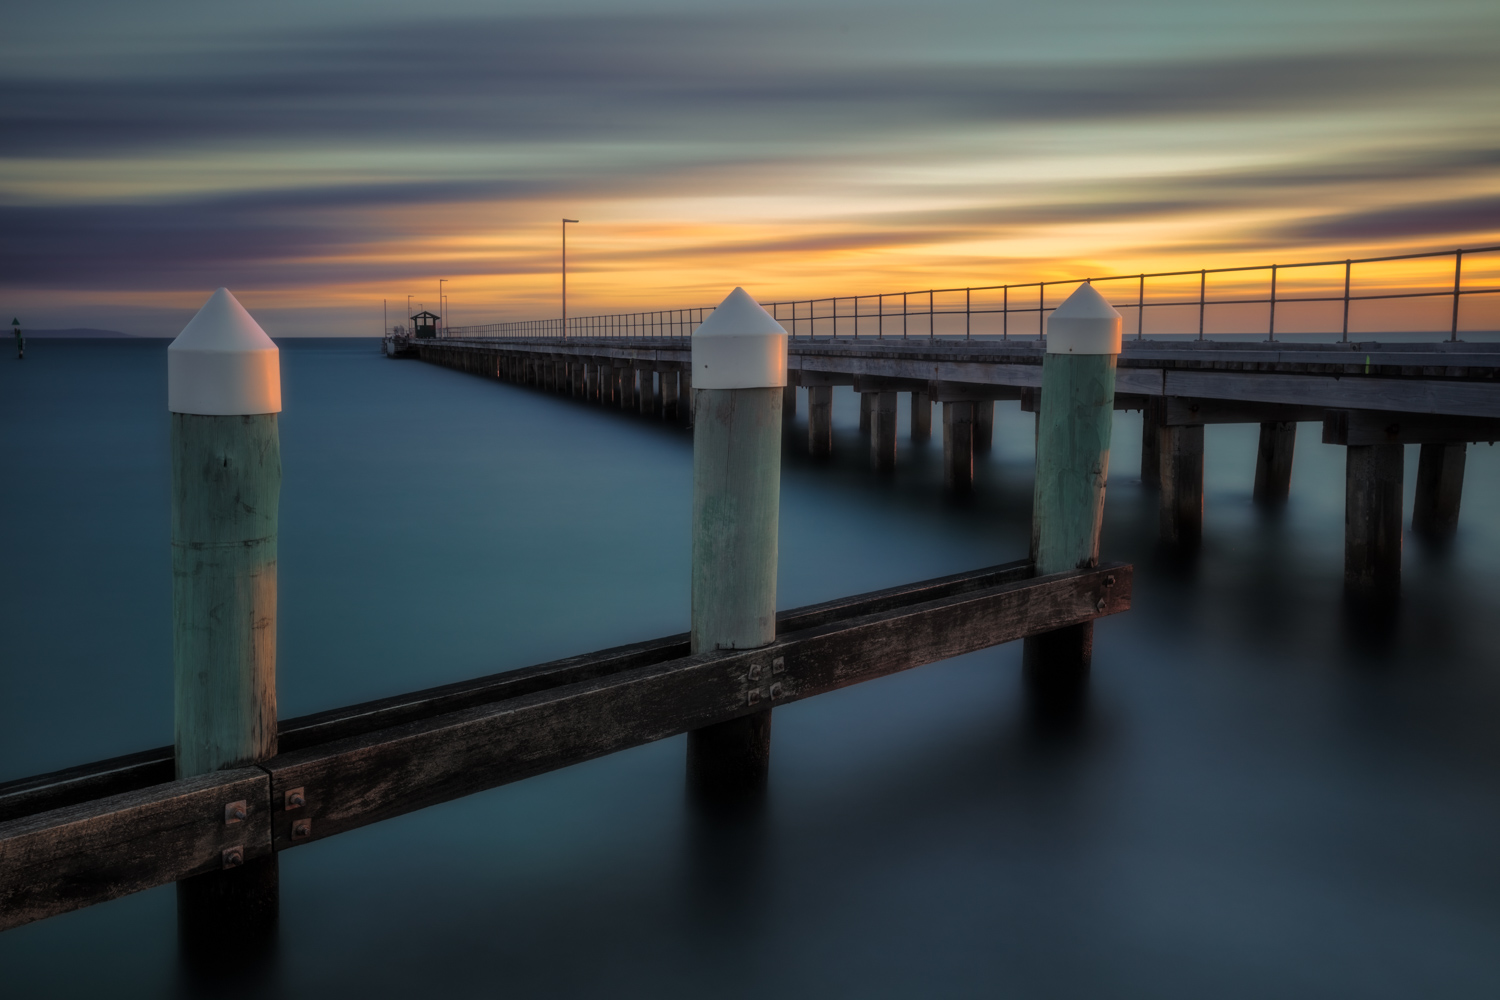 Long Exposure Photography Workshop - Mordialloc, Melbourne | Seascape Photography | We Are Raw Photography